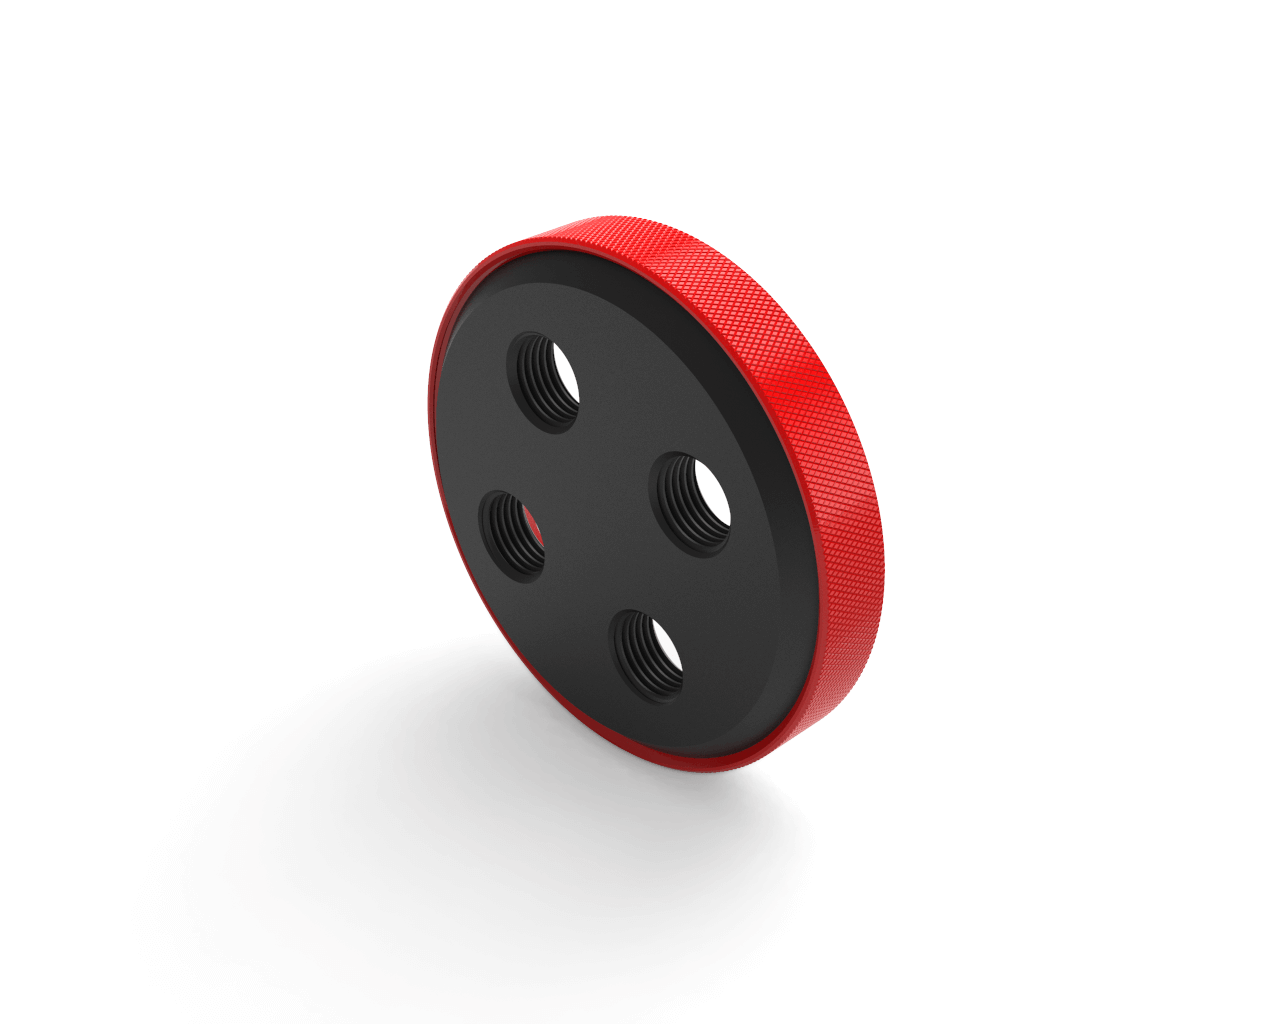 PrimoChill CTR Replacement SX Compression Ring - PrimoChill - KEEPING IT COOL UV Red